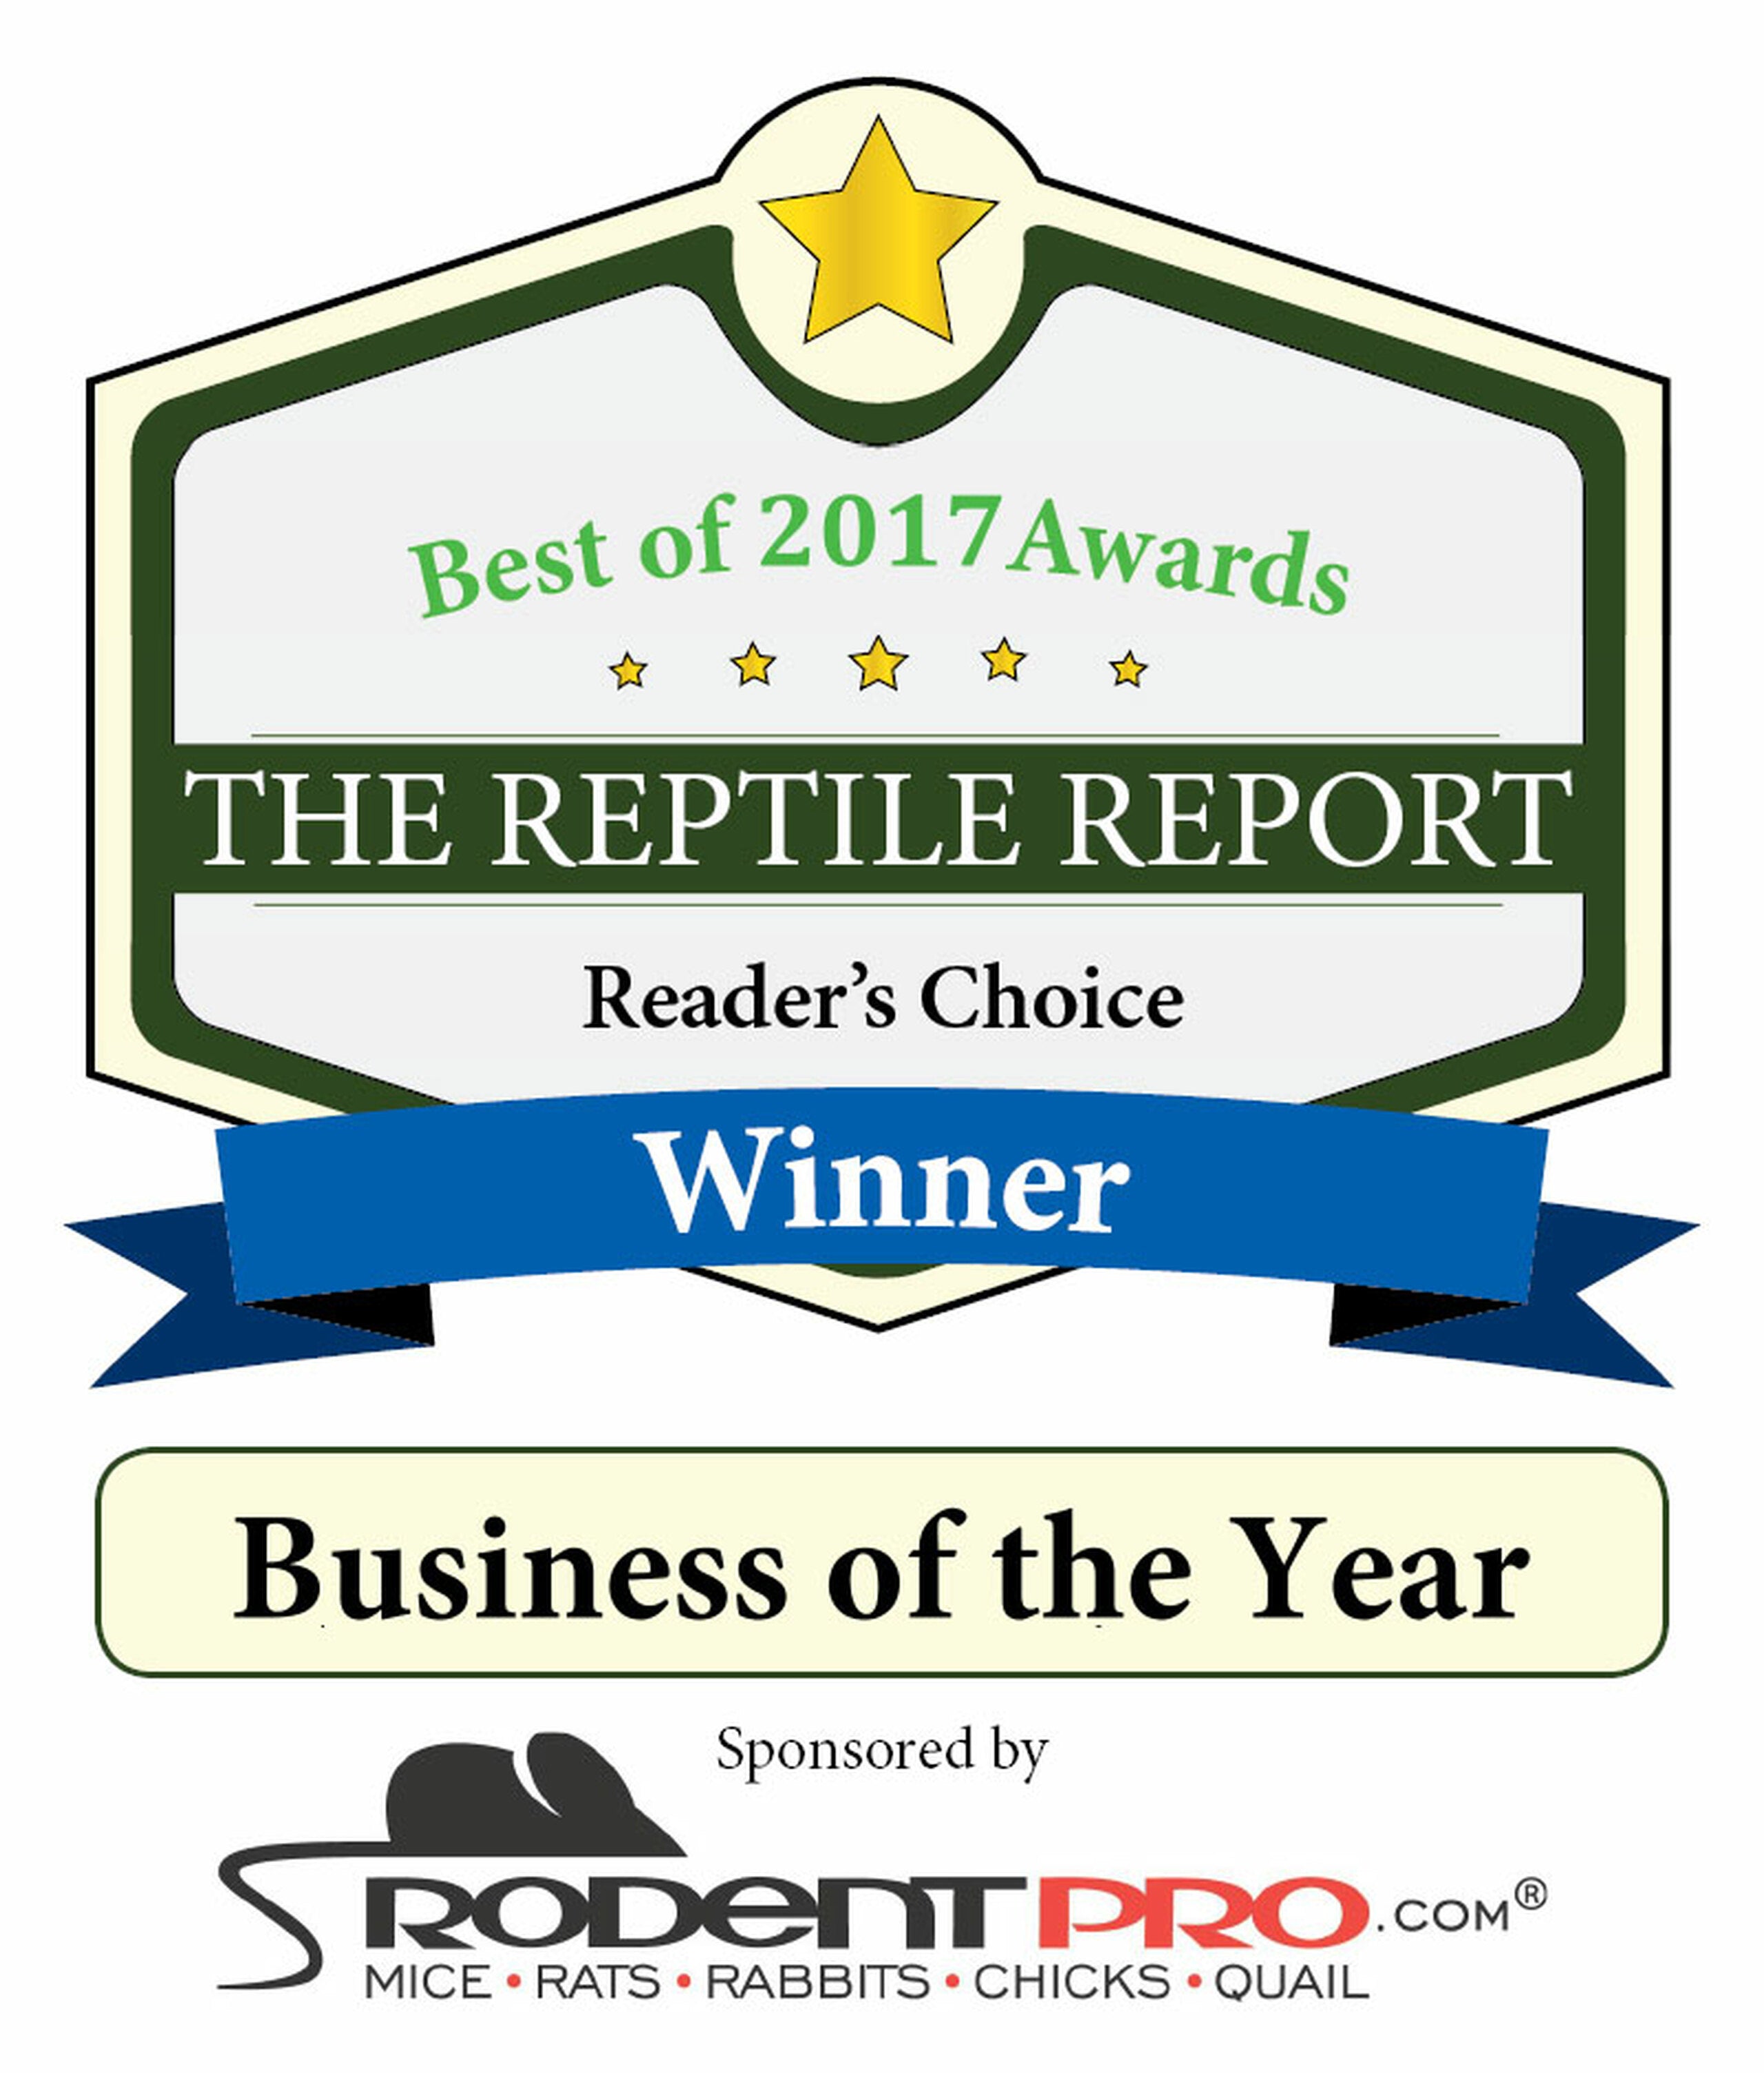 Internet Reptile wins Business of the Year award 2017